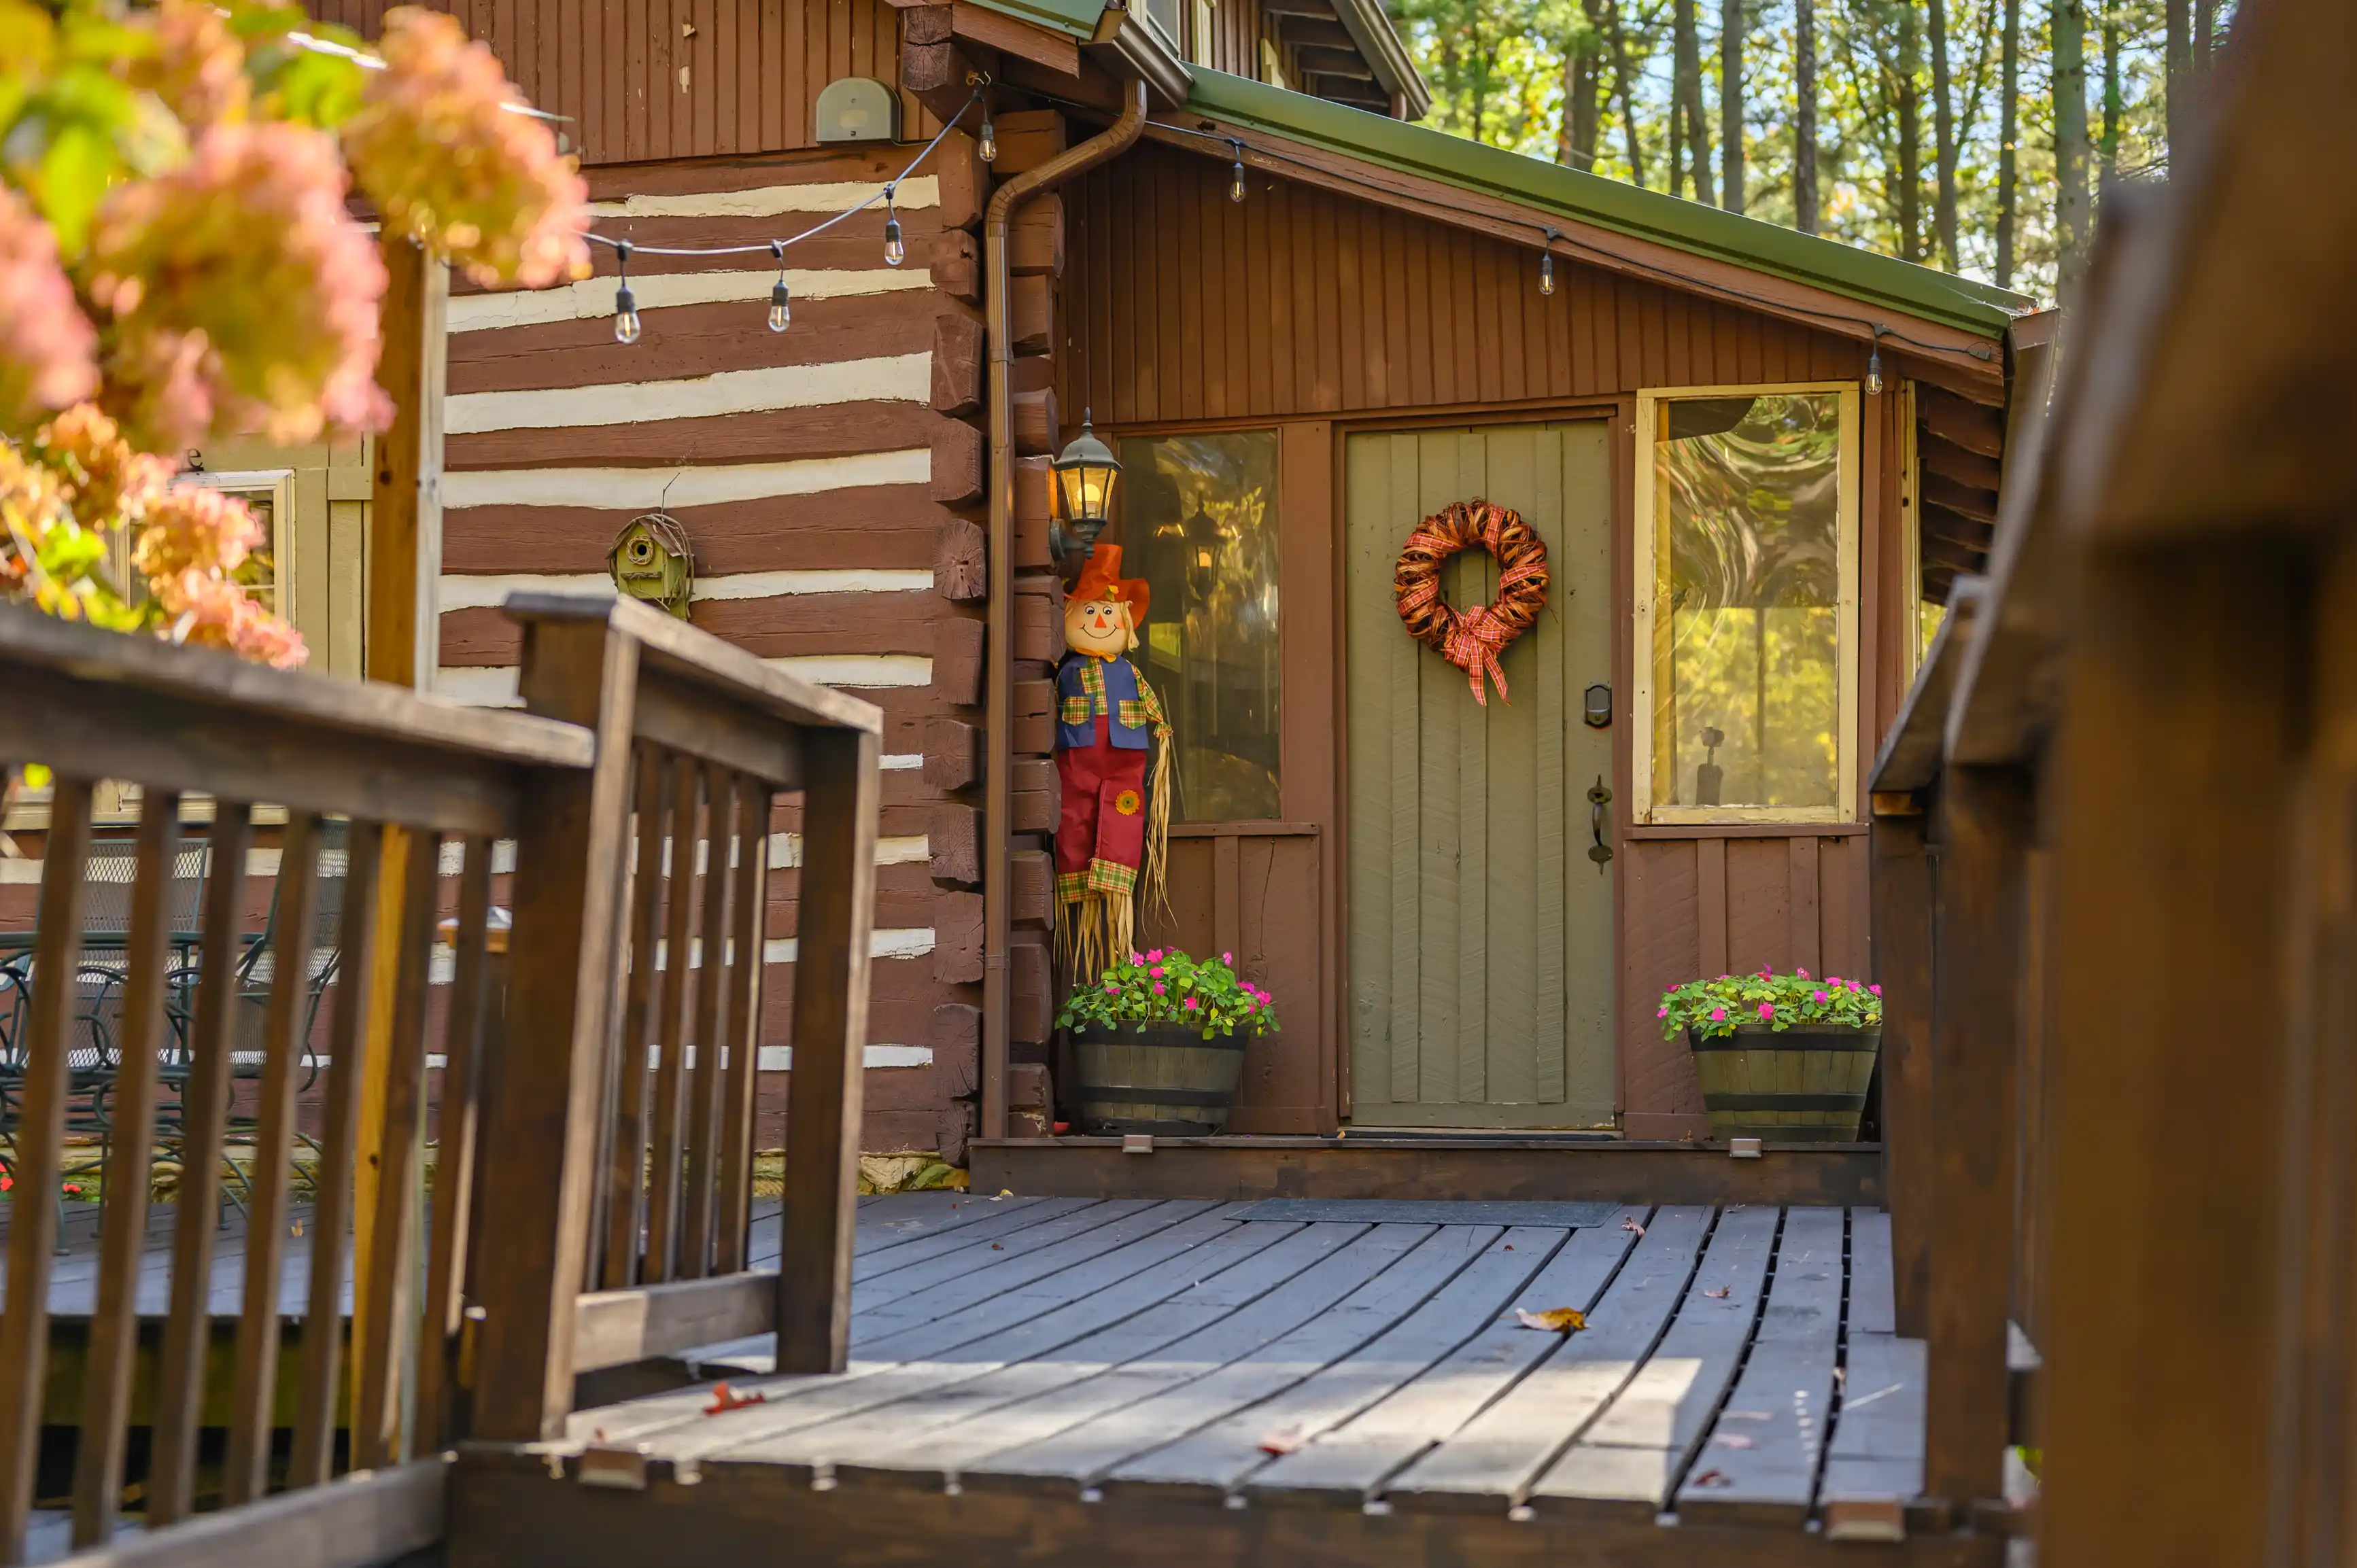 Cozy wooden cabin entrance with a heart-shaped wreath on the door, seasonal decorations, and surrounded by autumn foliage.